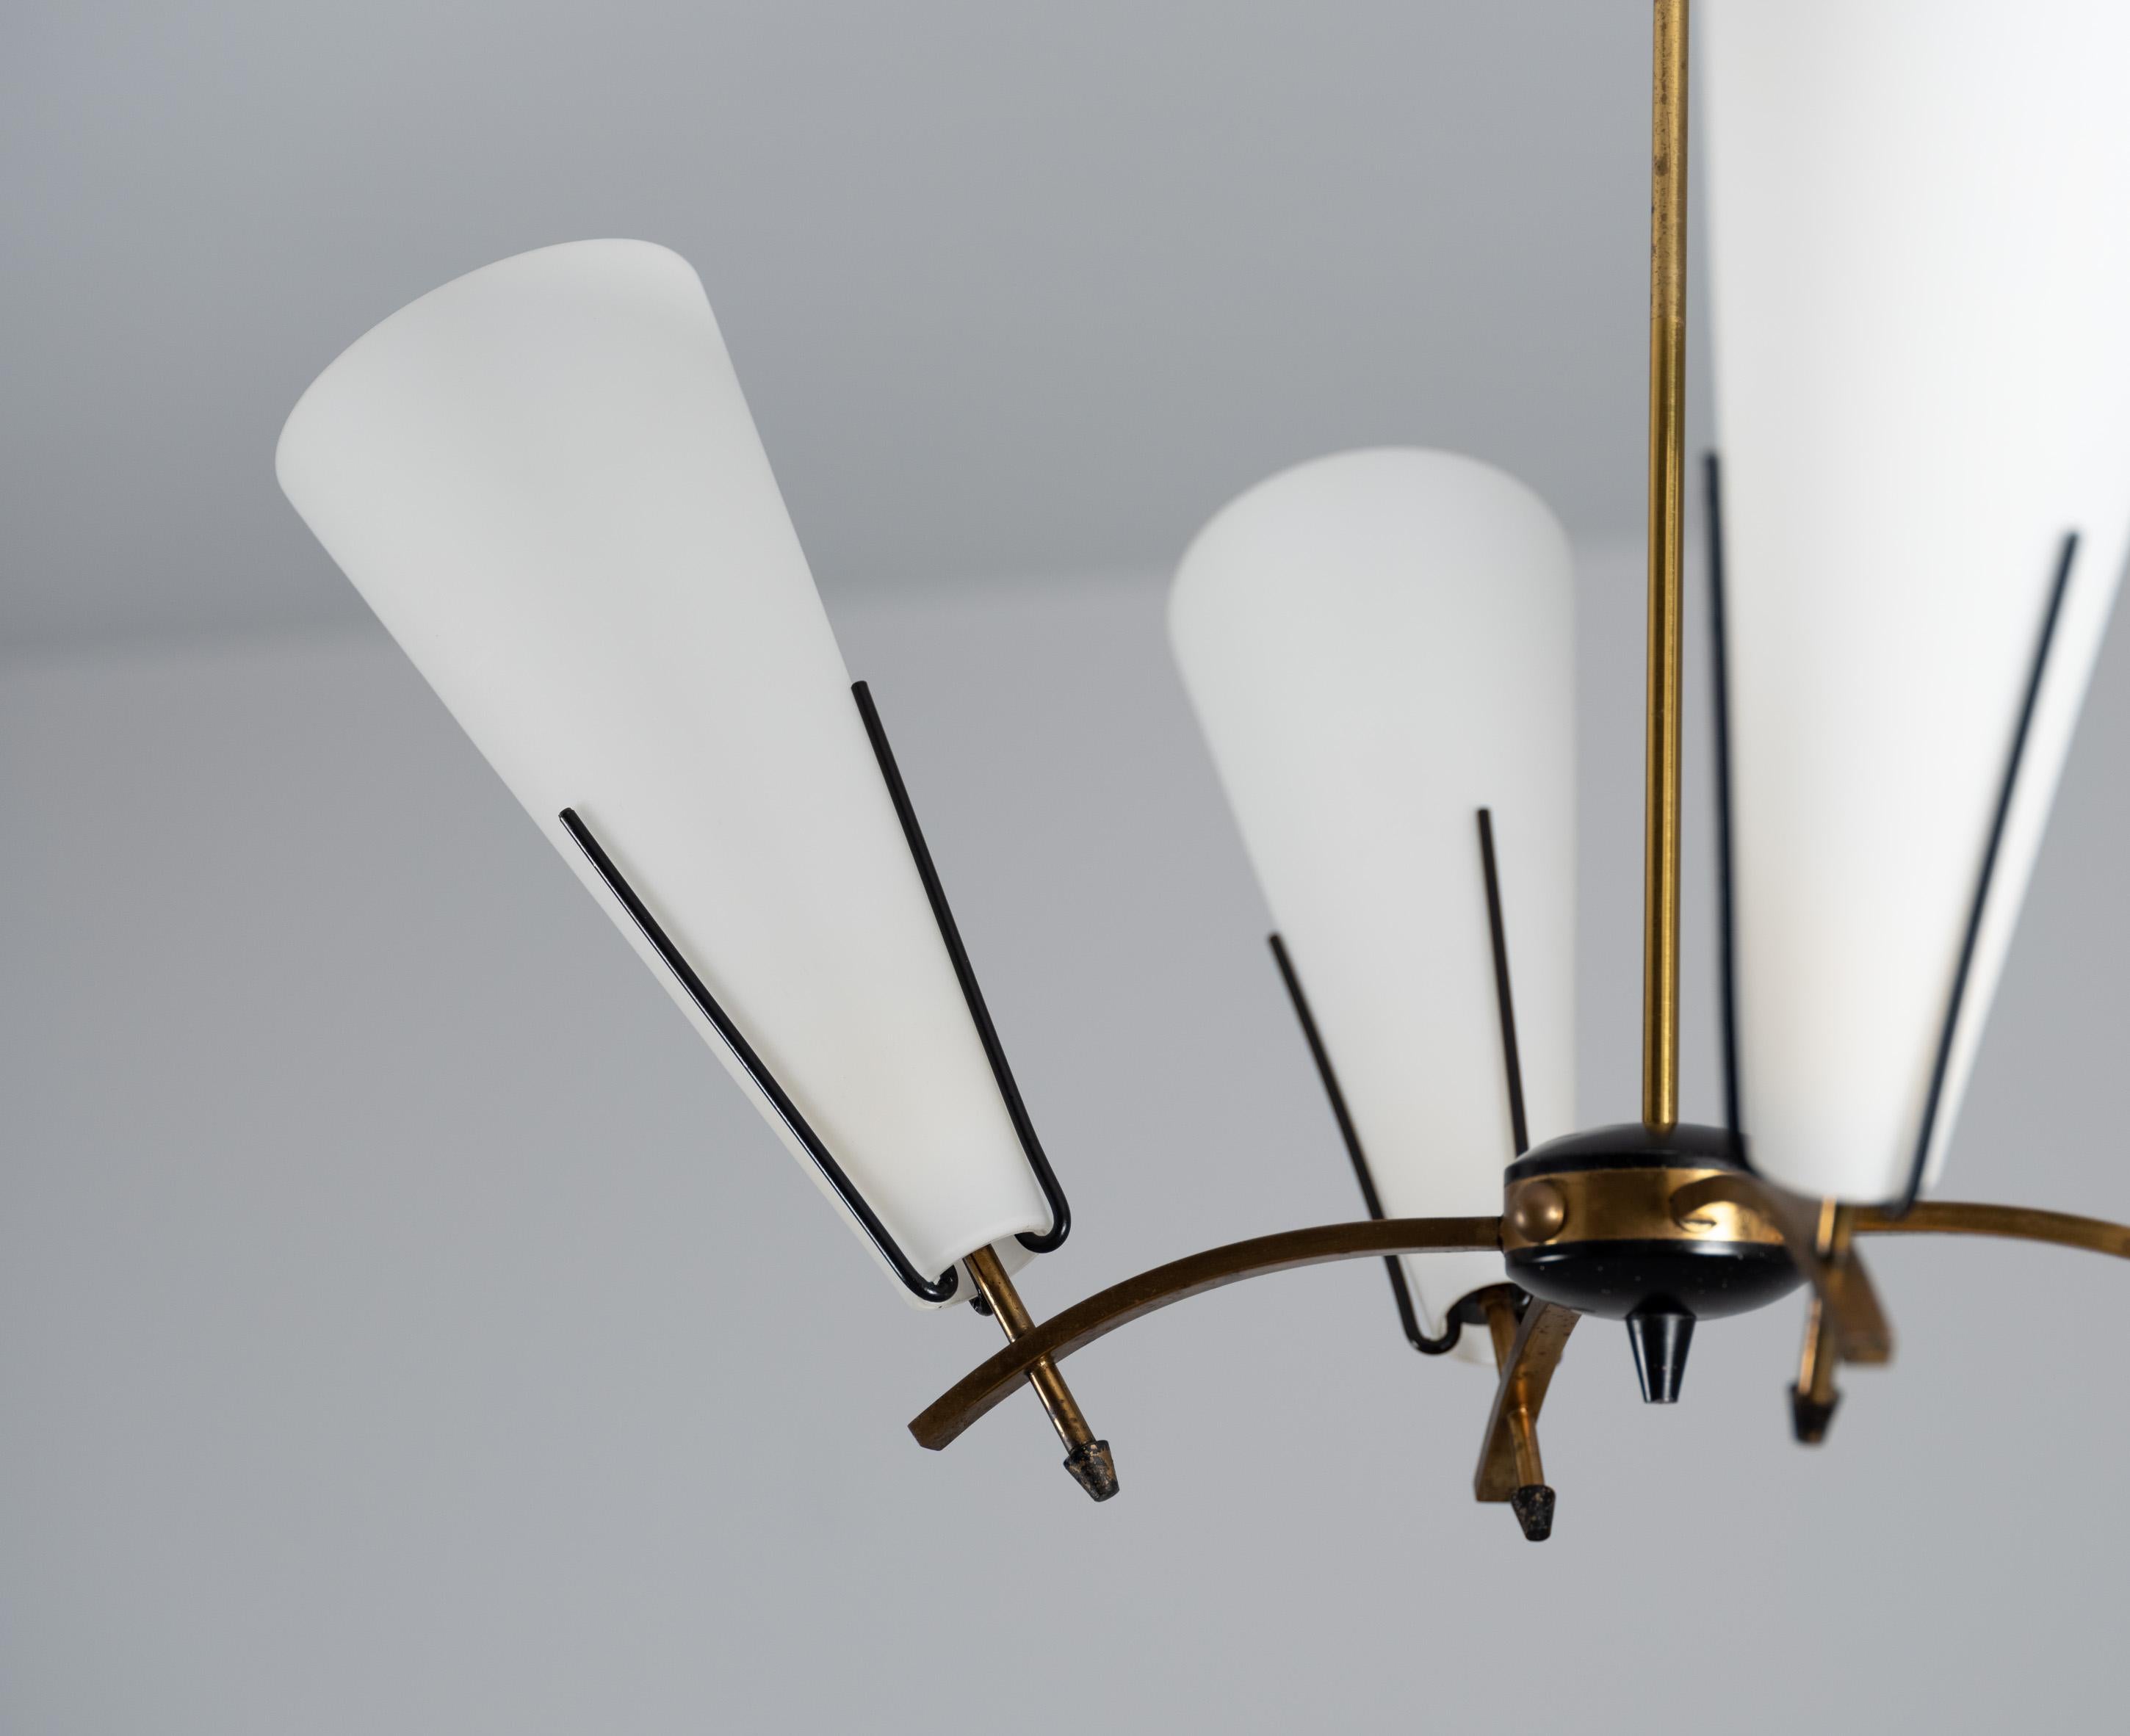 Mid-20th Century Stilnovo 1950s Chandelier in Brass and 4 Conical Opals, Vintage Italian Design